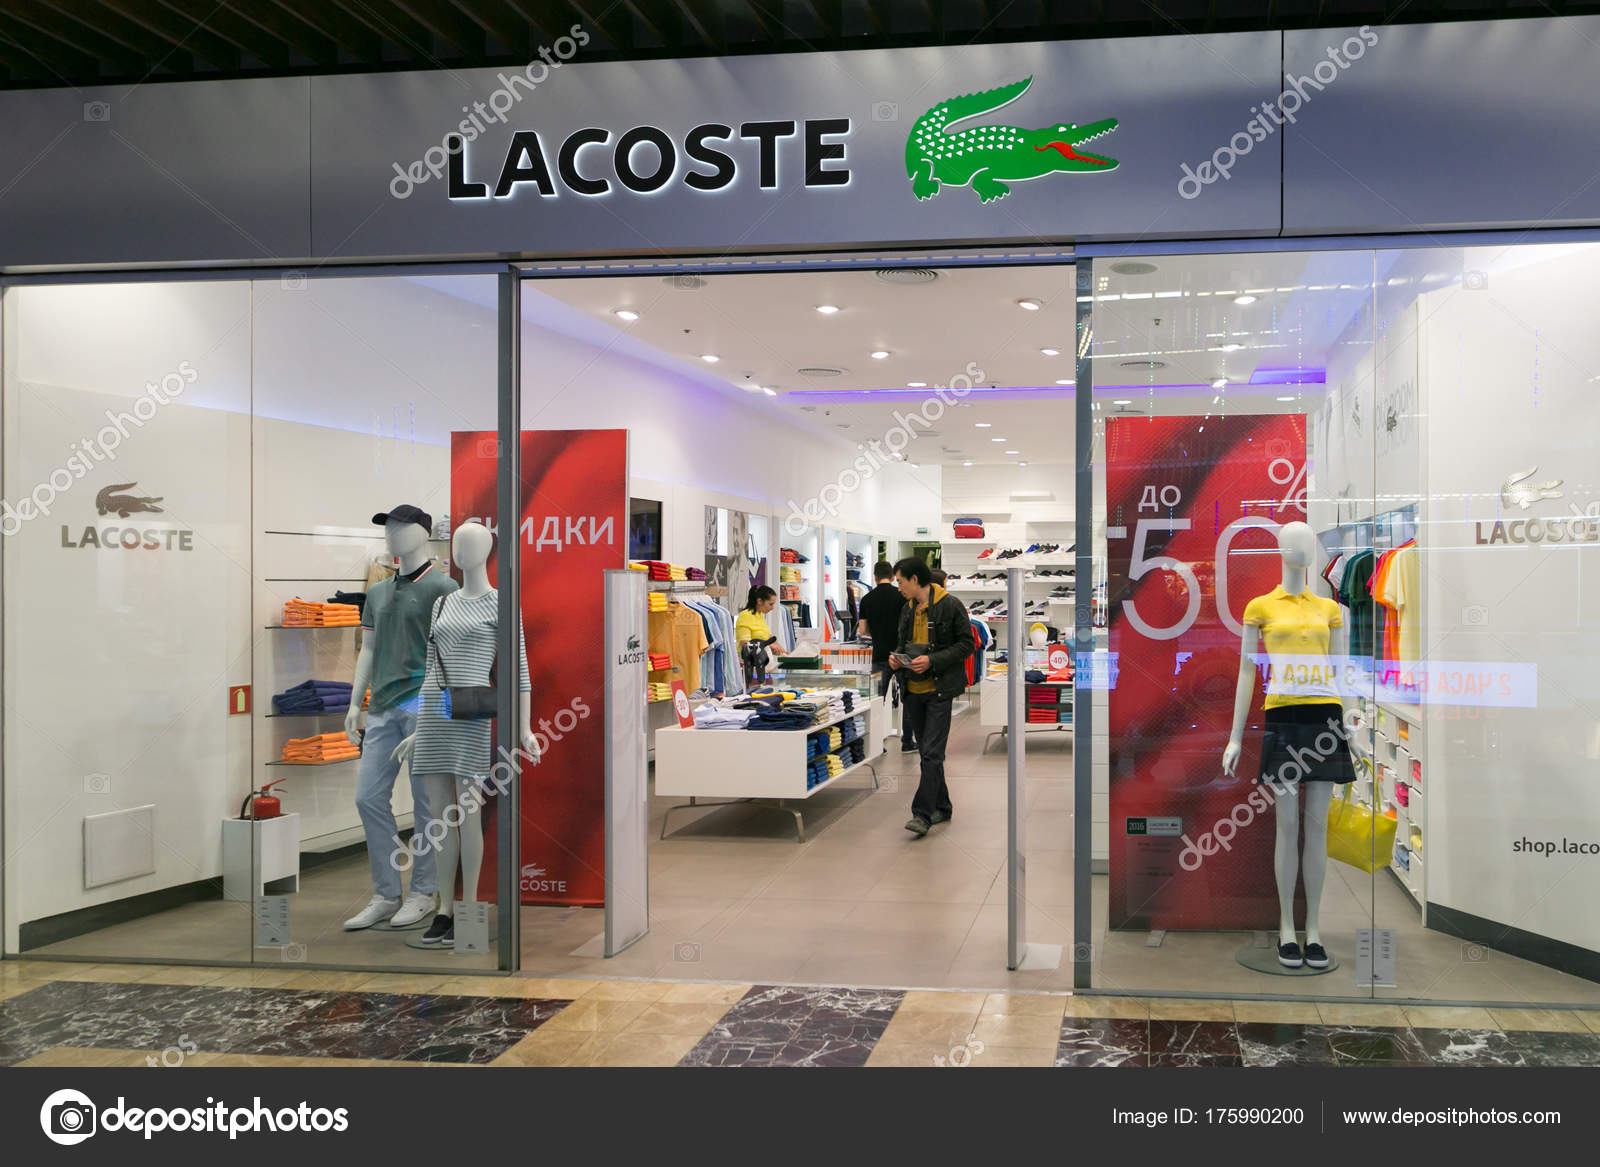 lacoste clothing store